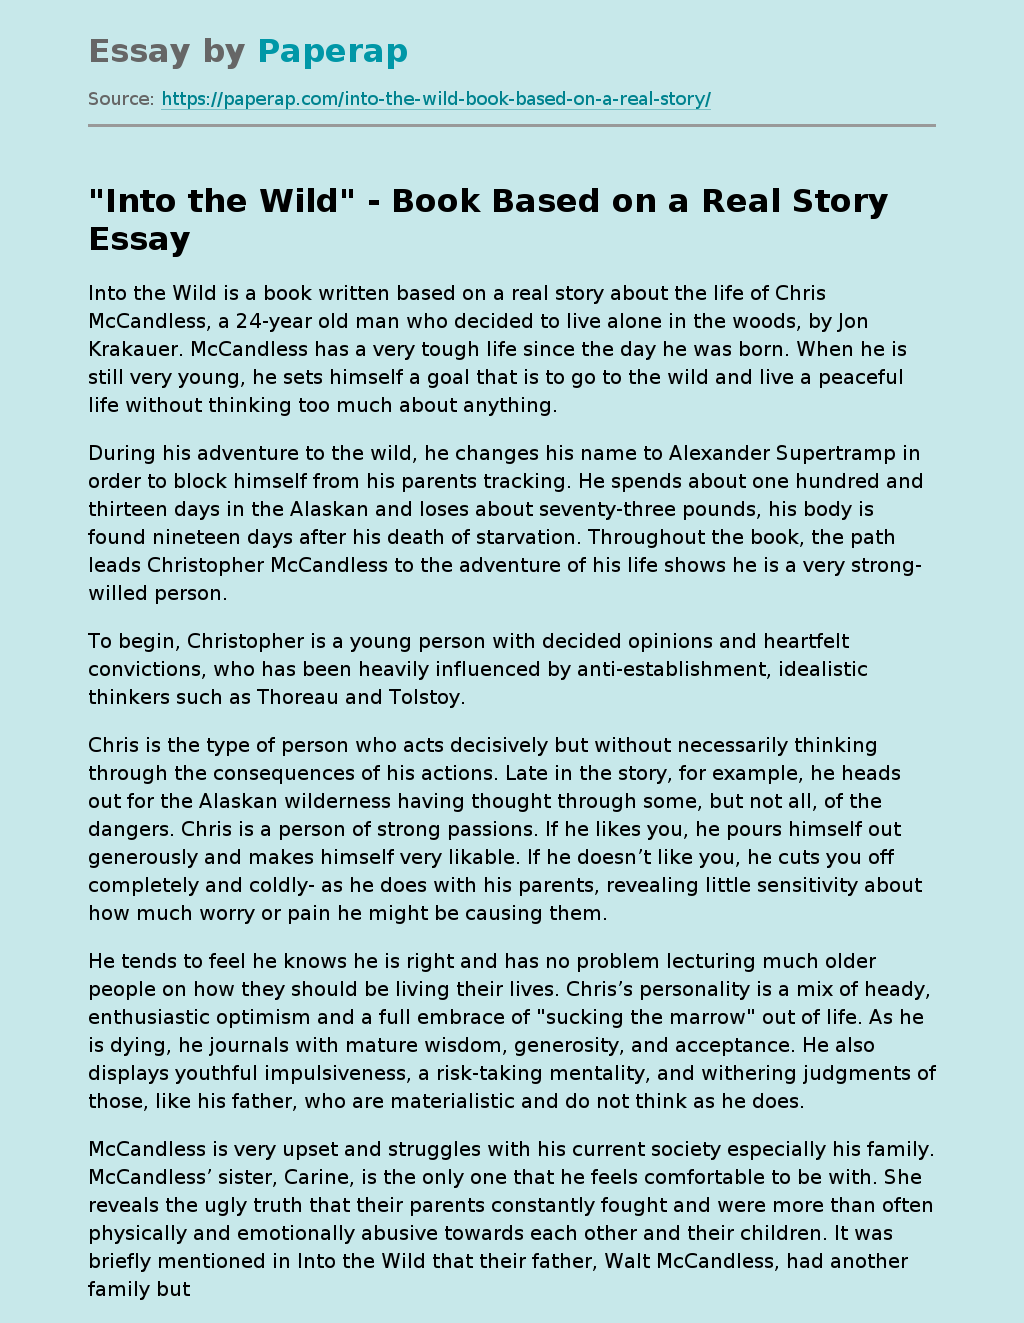 "Into the Wild" - Book Based on a Real Story